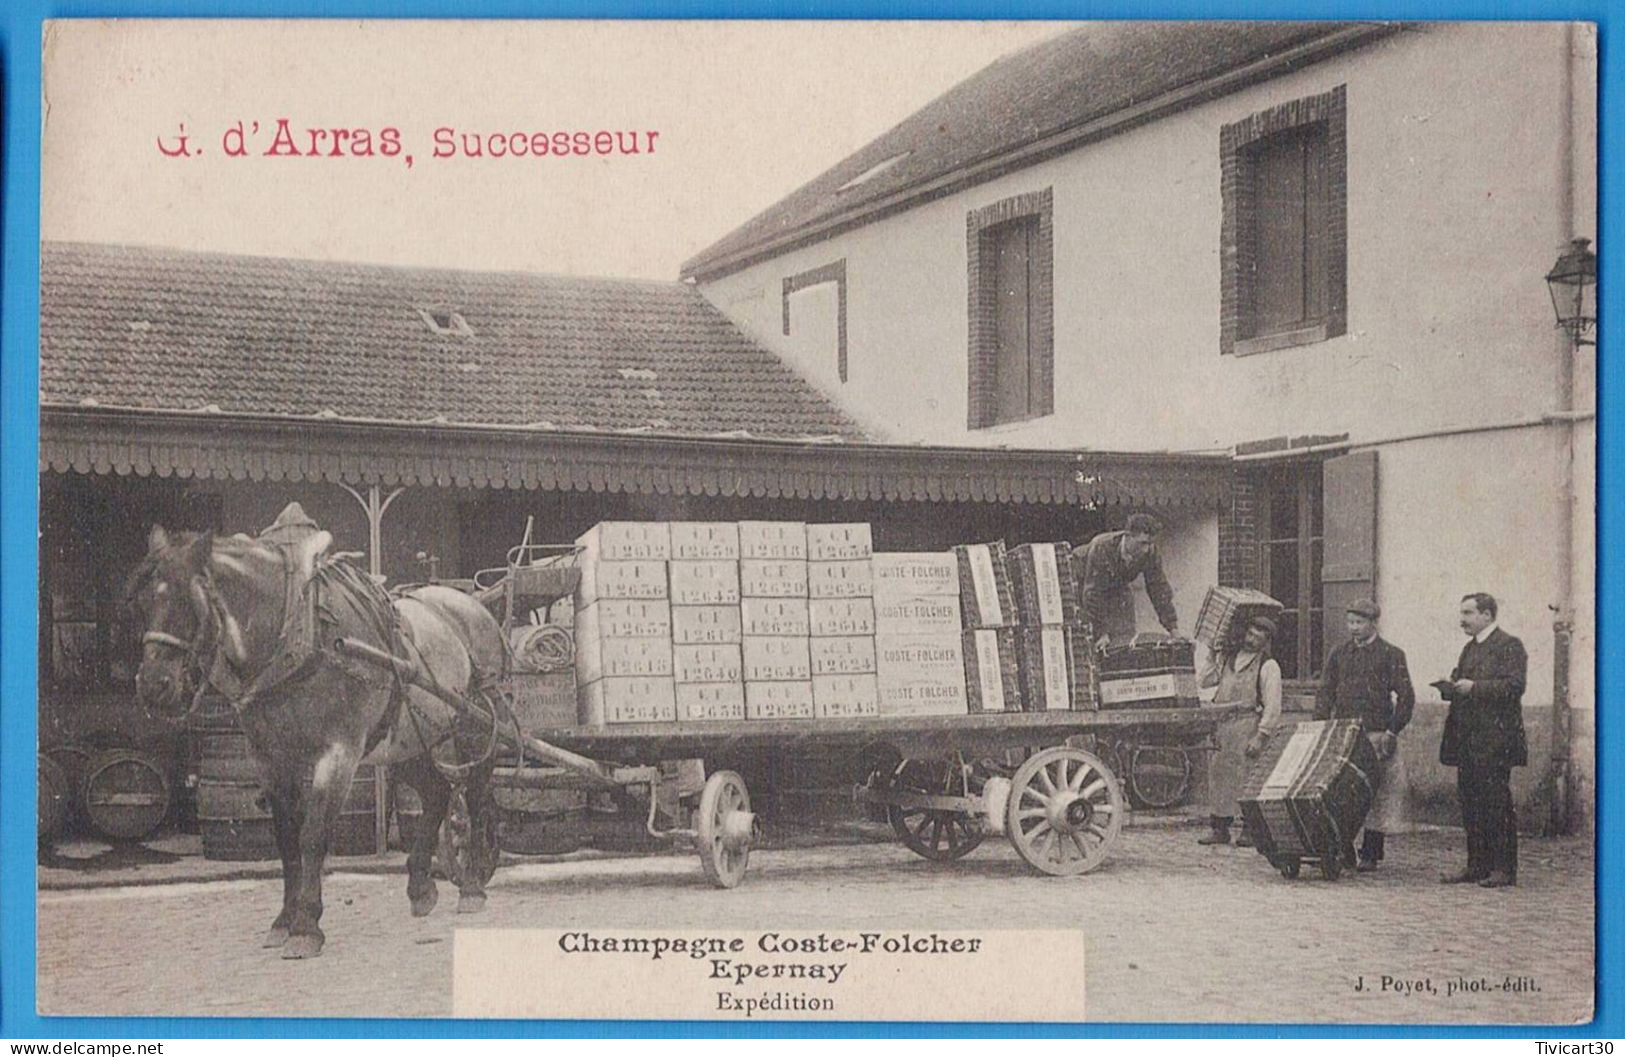 CPA MARNE (51) - EPERNAY - CHAMPAGNE COSTE FOLCHER - EXPEDITION - G. D'ARRAS, SUCCESSEUR - Epernay